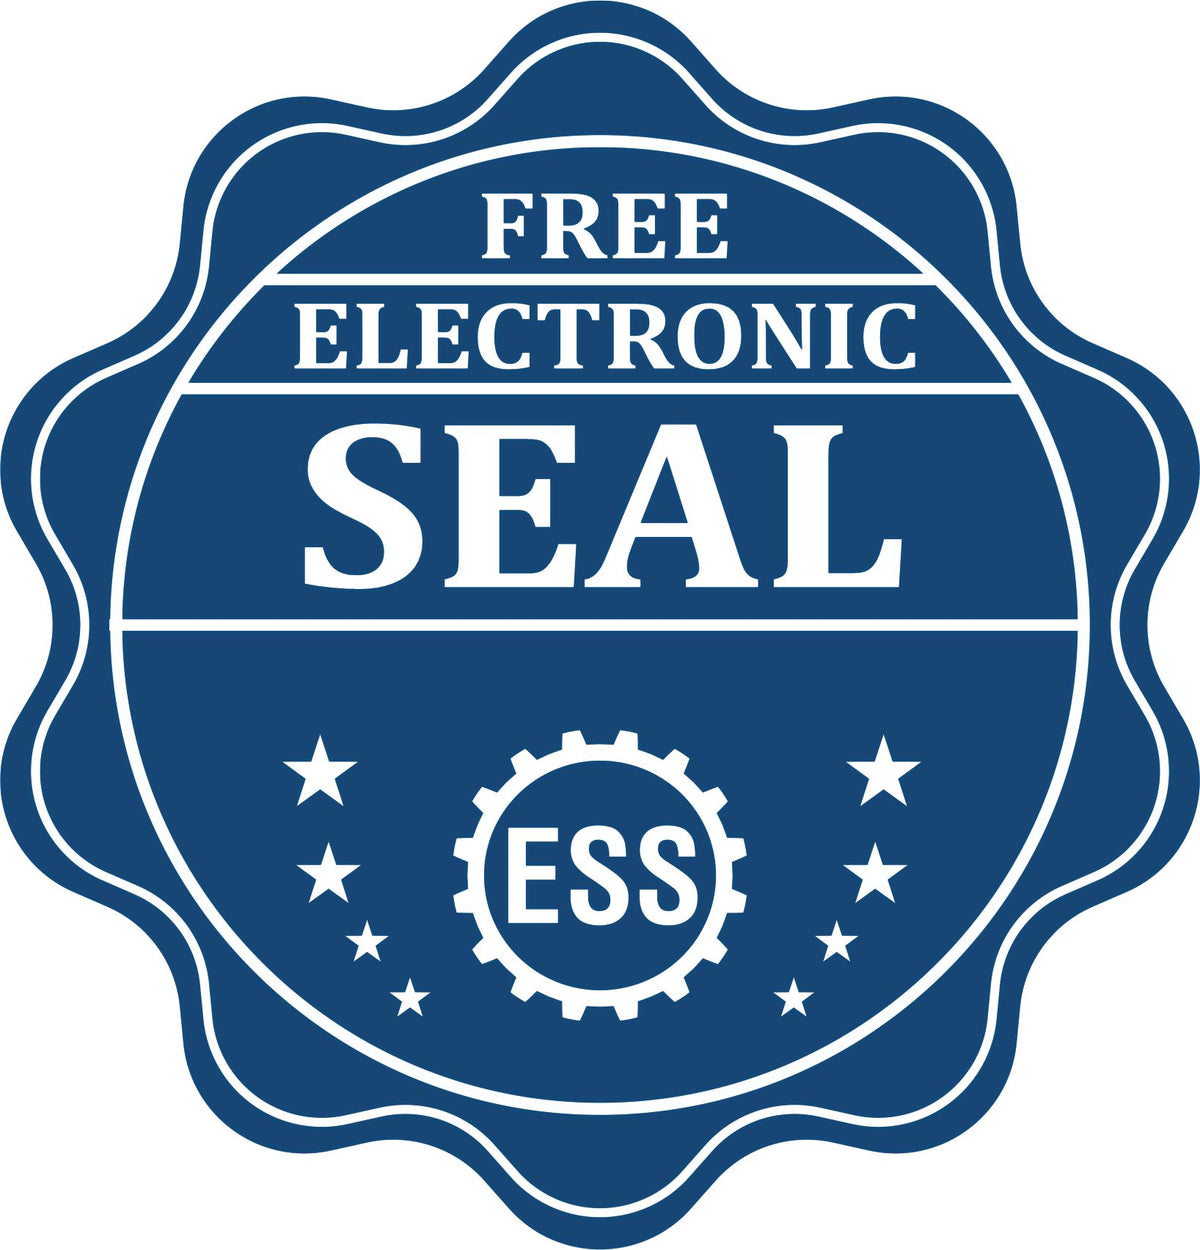 A badge showing a free electronic seal for the Extended Long Reach Louisiana Surveyor Embosser with stars and the ESS gear on the emblem.